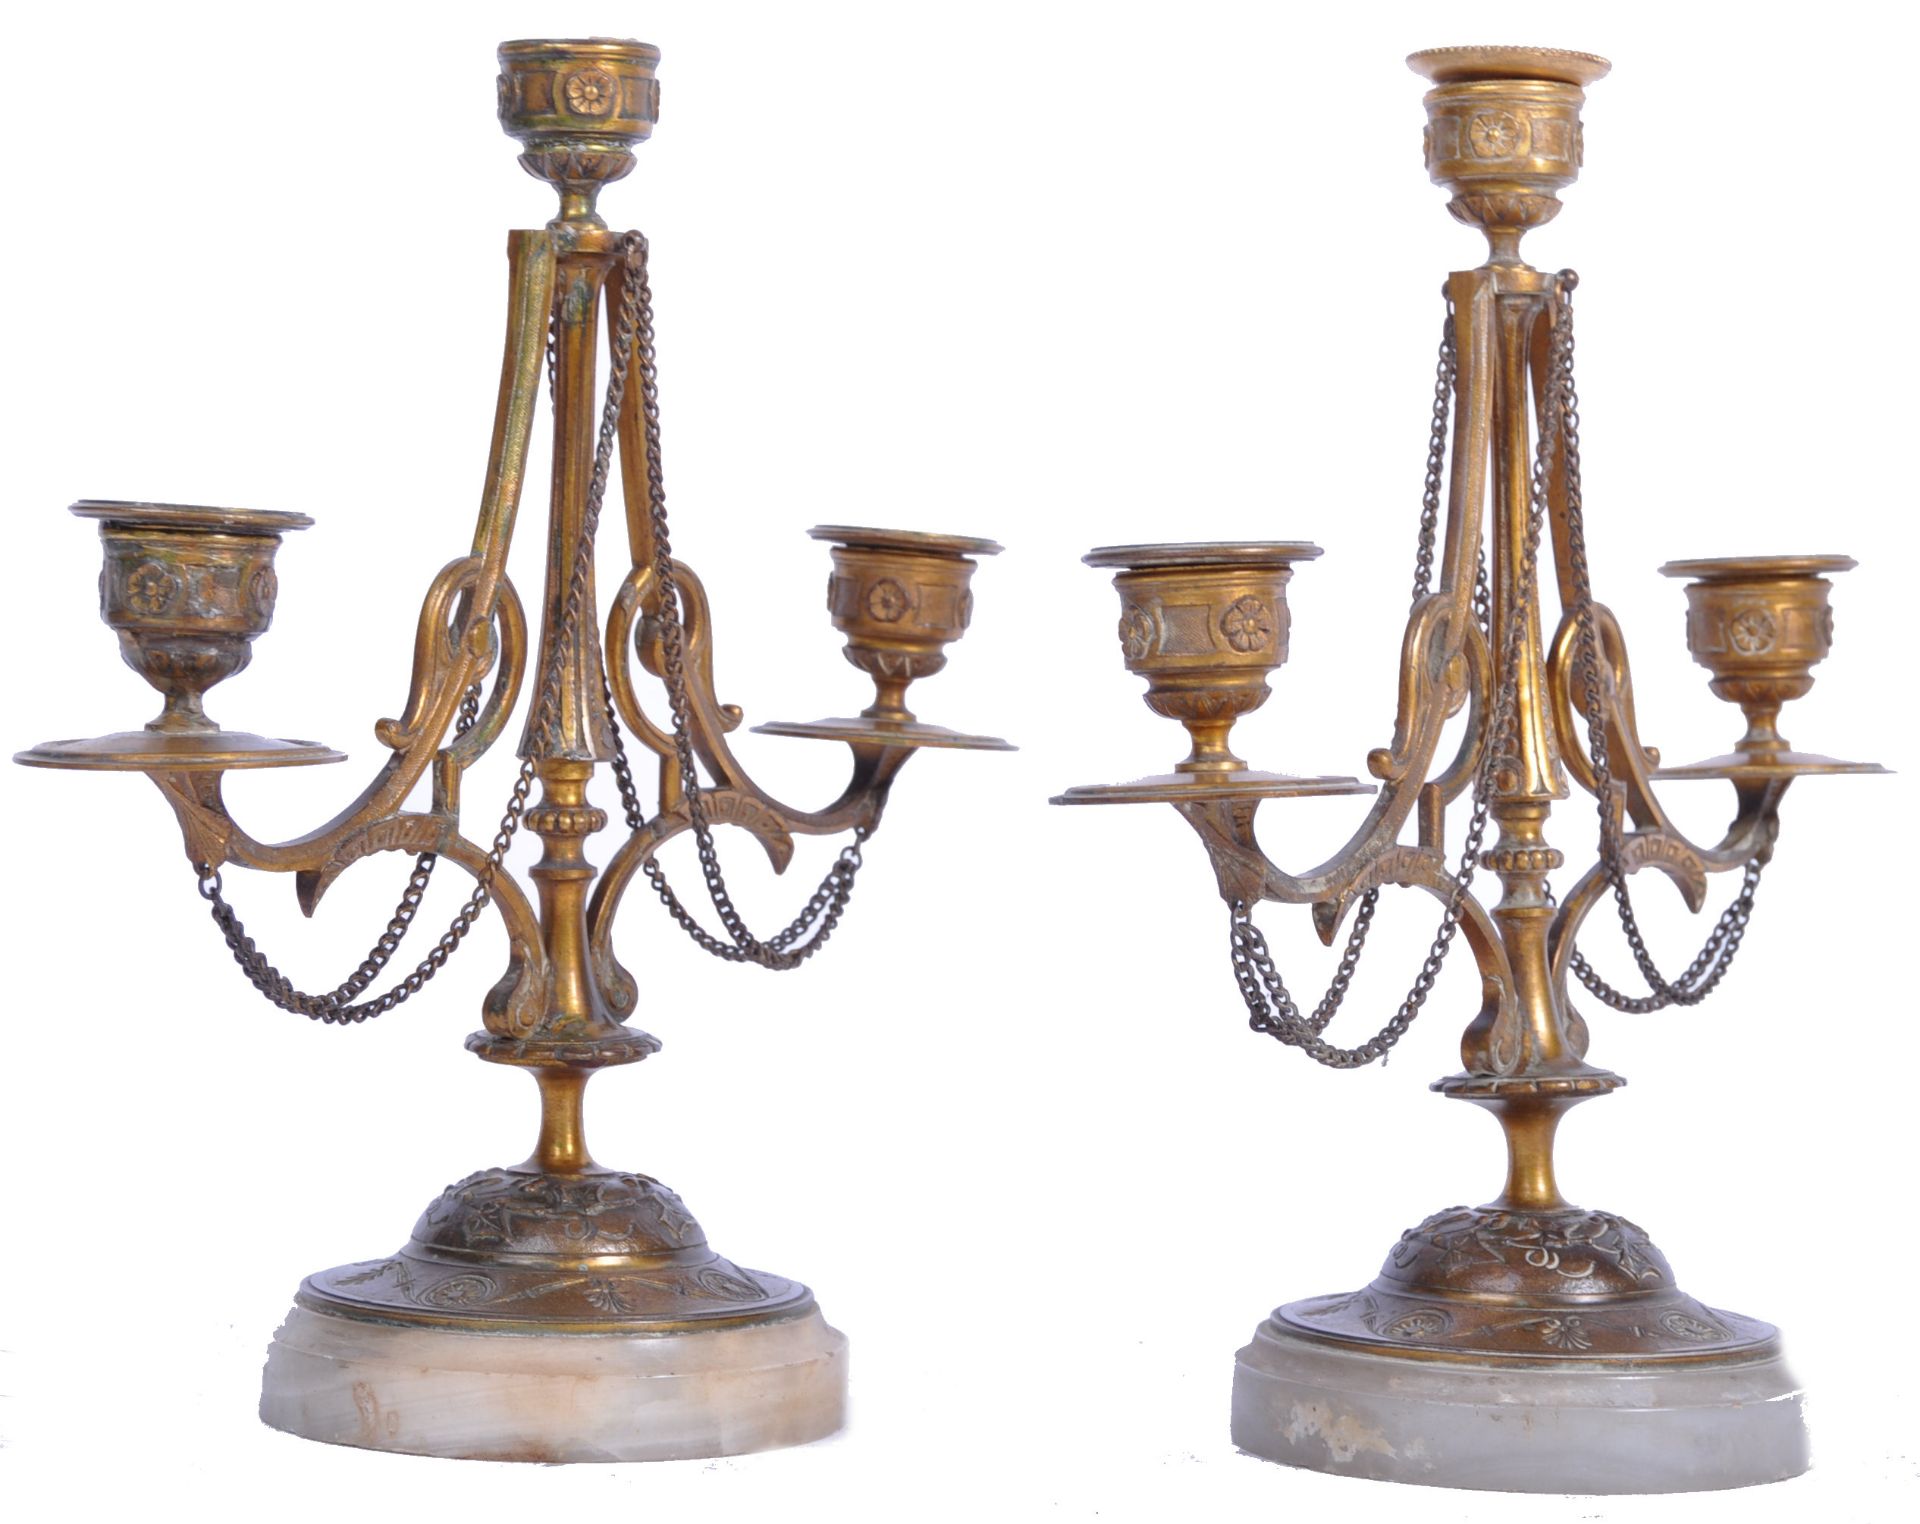 PAIR OF 19TH CENTURY BRONZE AND MARBLE CANDLESTICKS